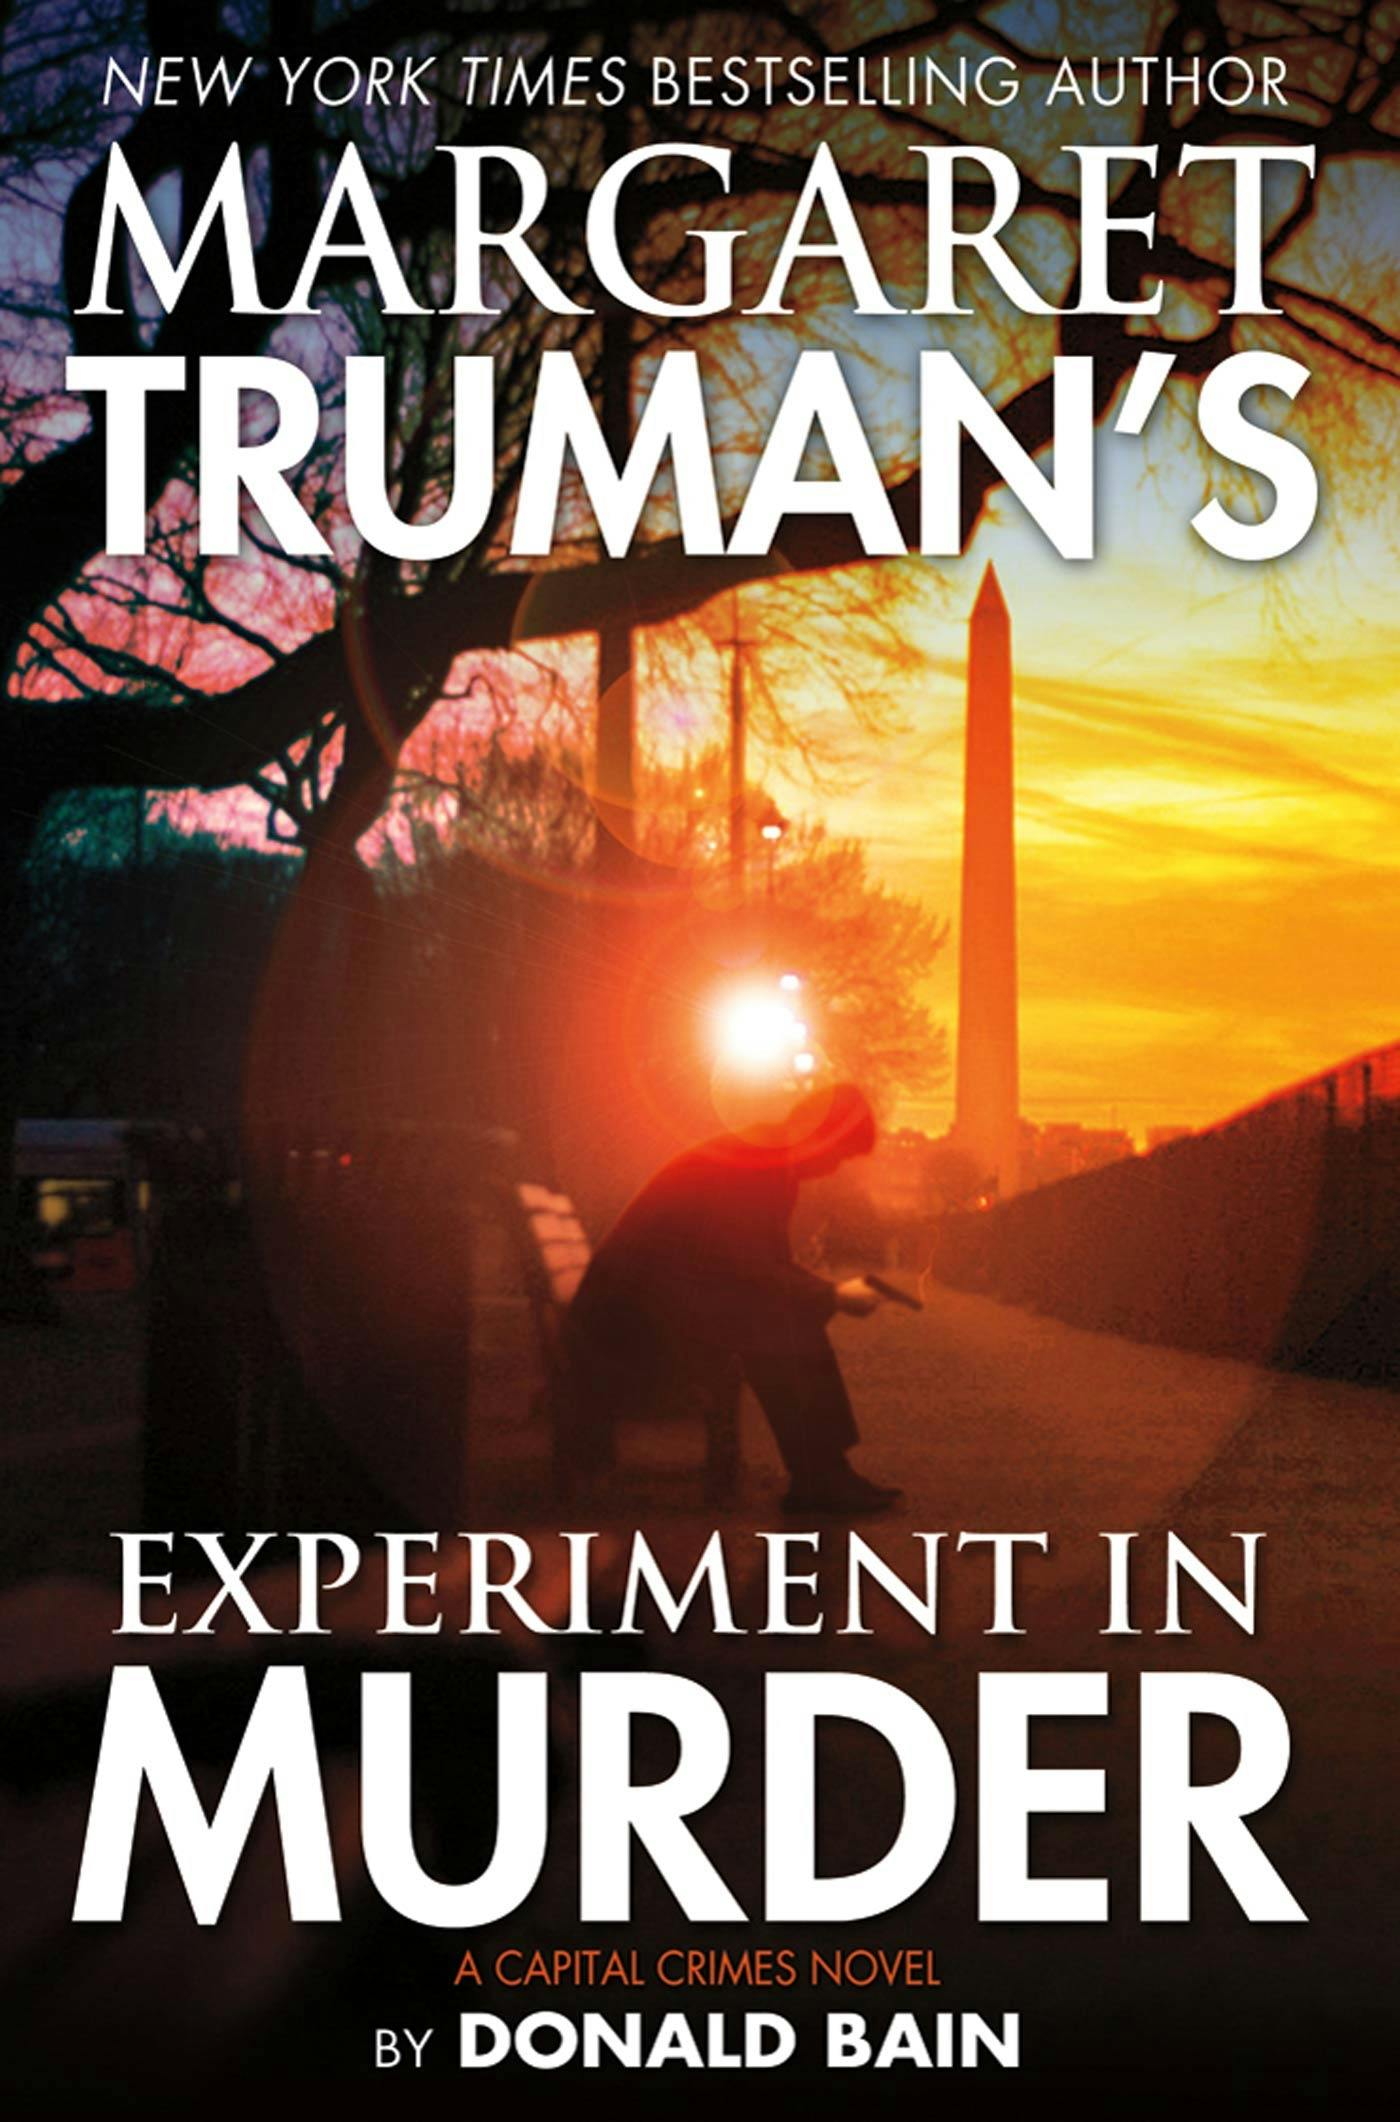 Cover for the book titled as: Margaret Truman's Experiment in Murder